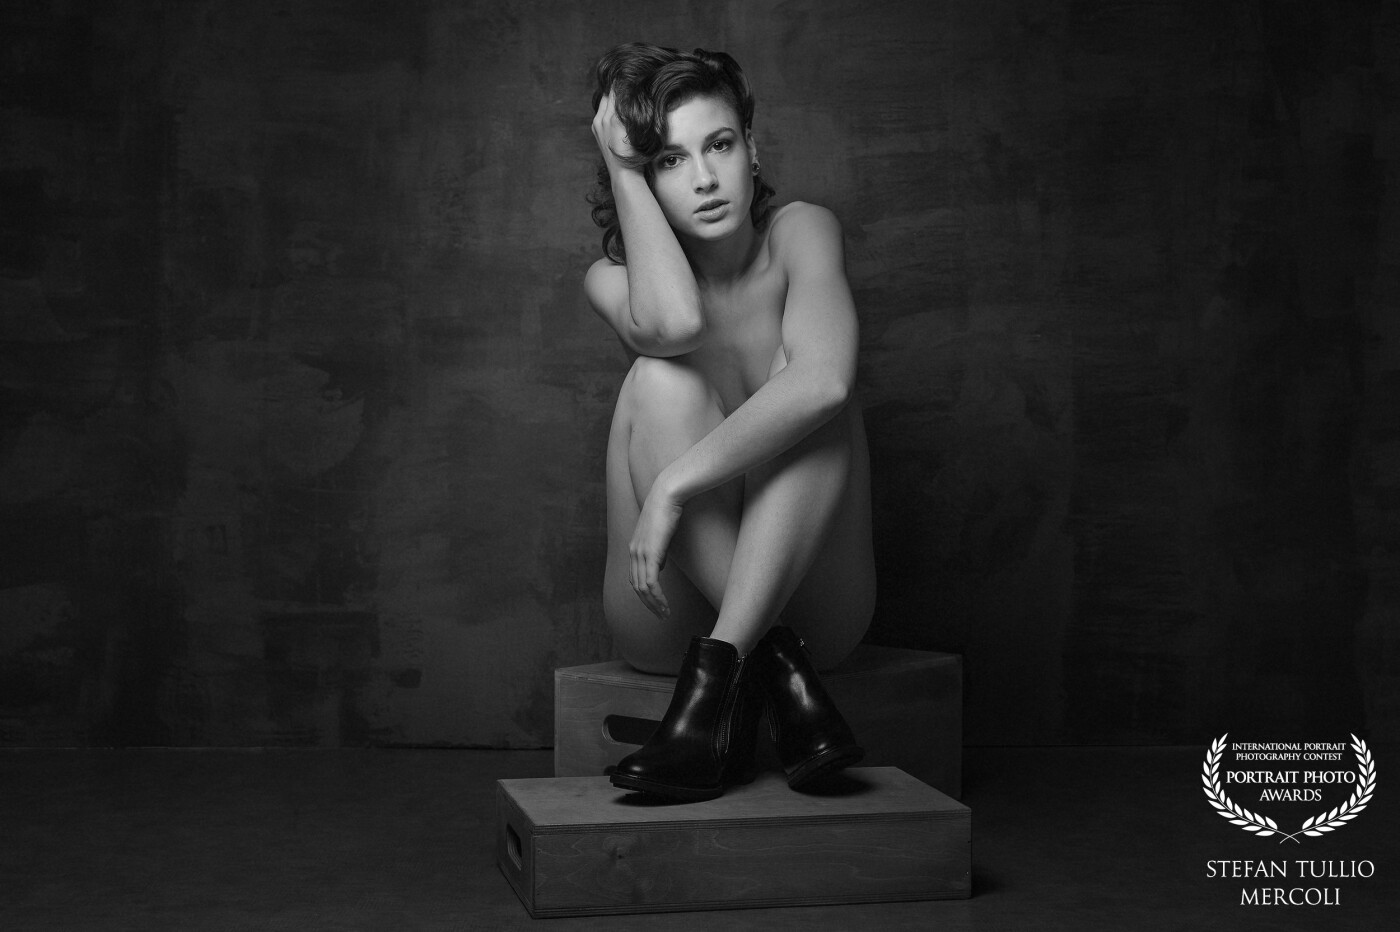 This was one of my last studio shootings 2021 with model Sey. This picture is inspired by Peter Coulson - he made a video about: "nude without being nude". So we tried our own version.